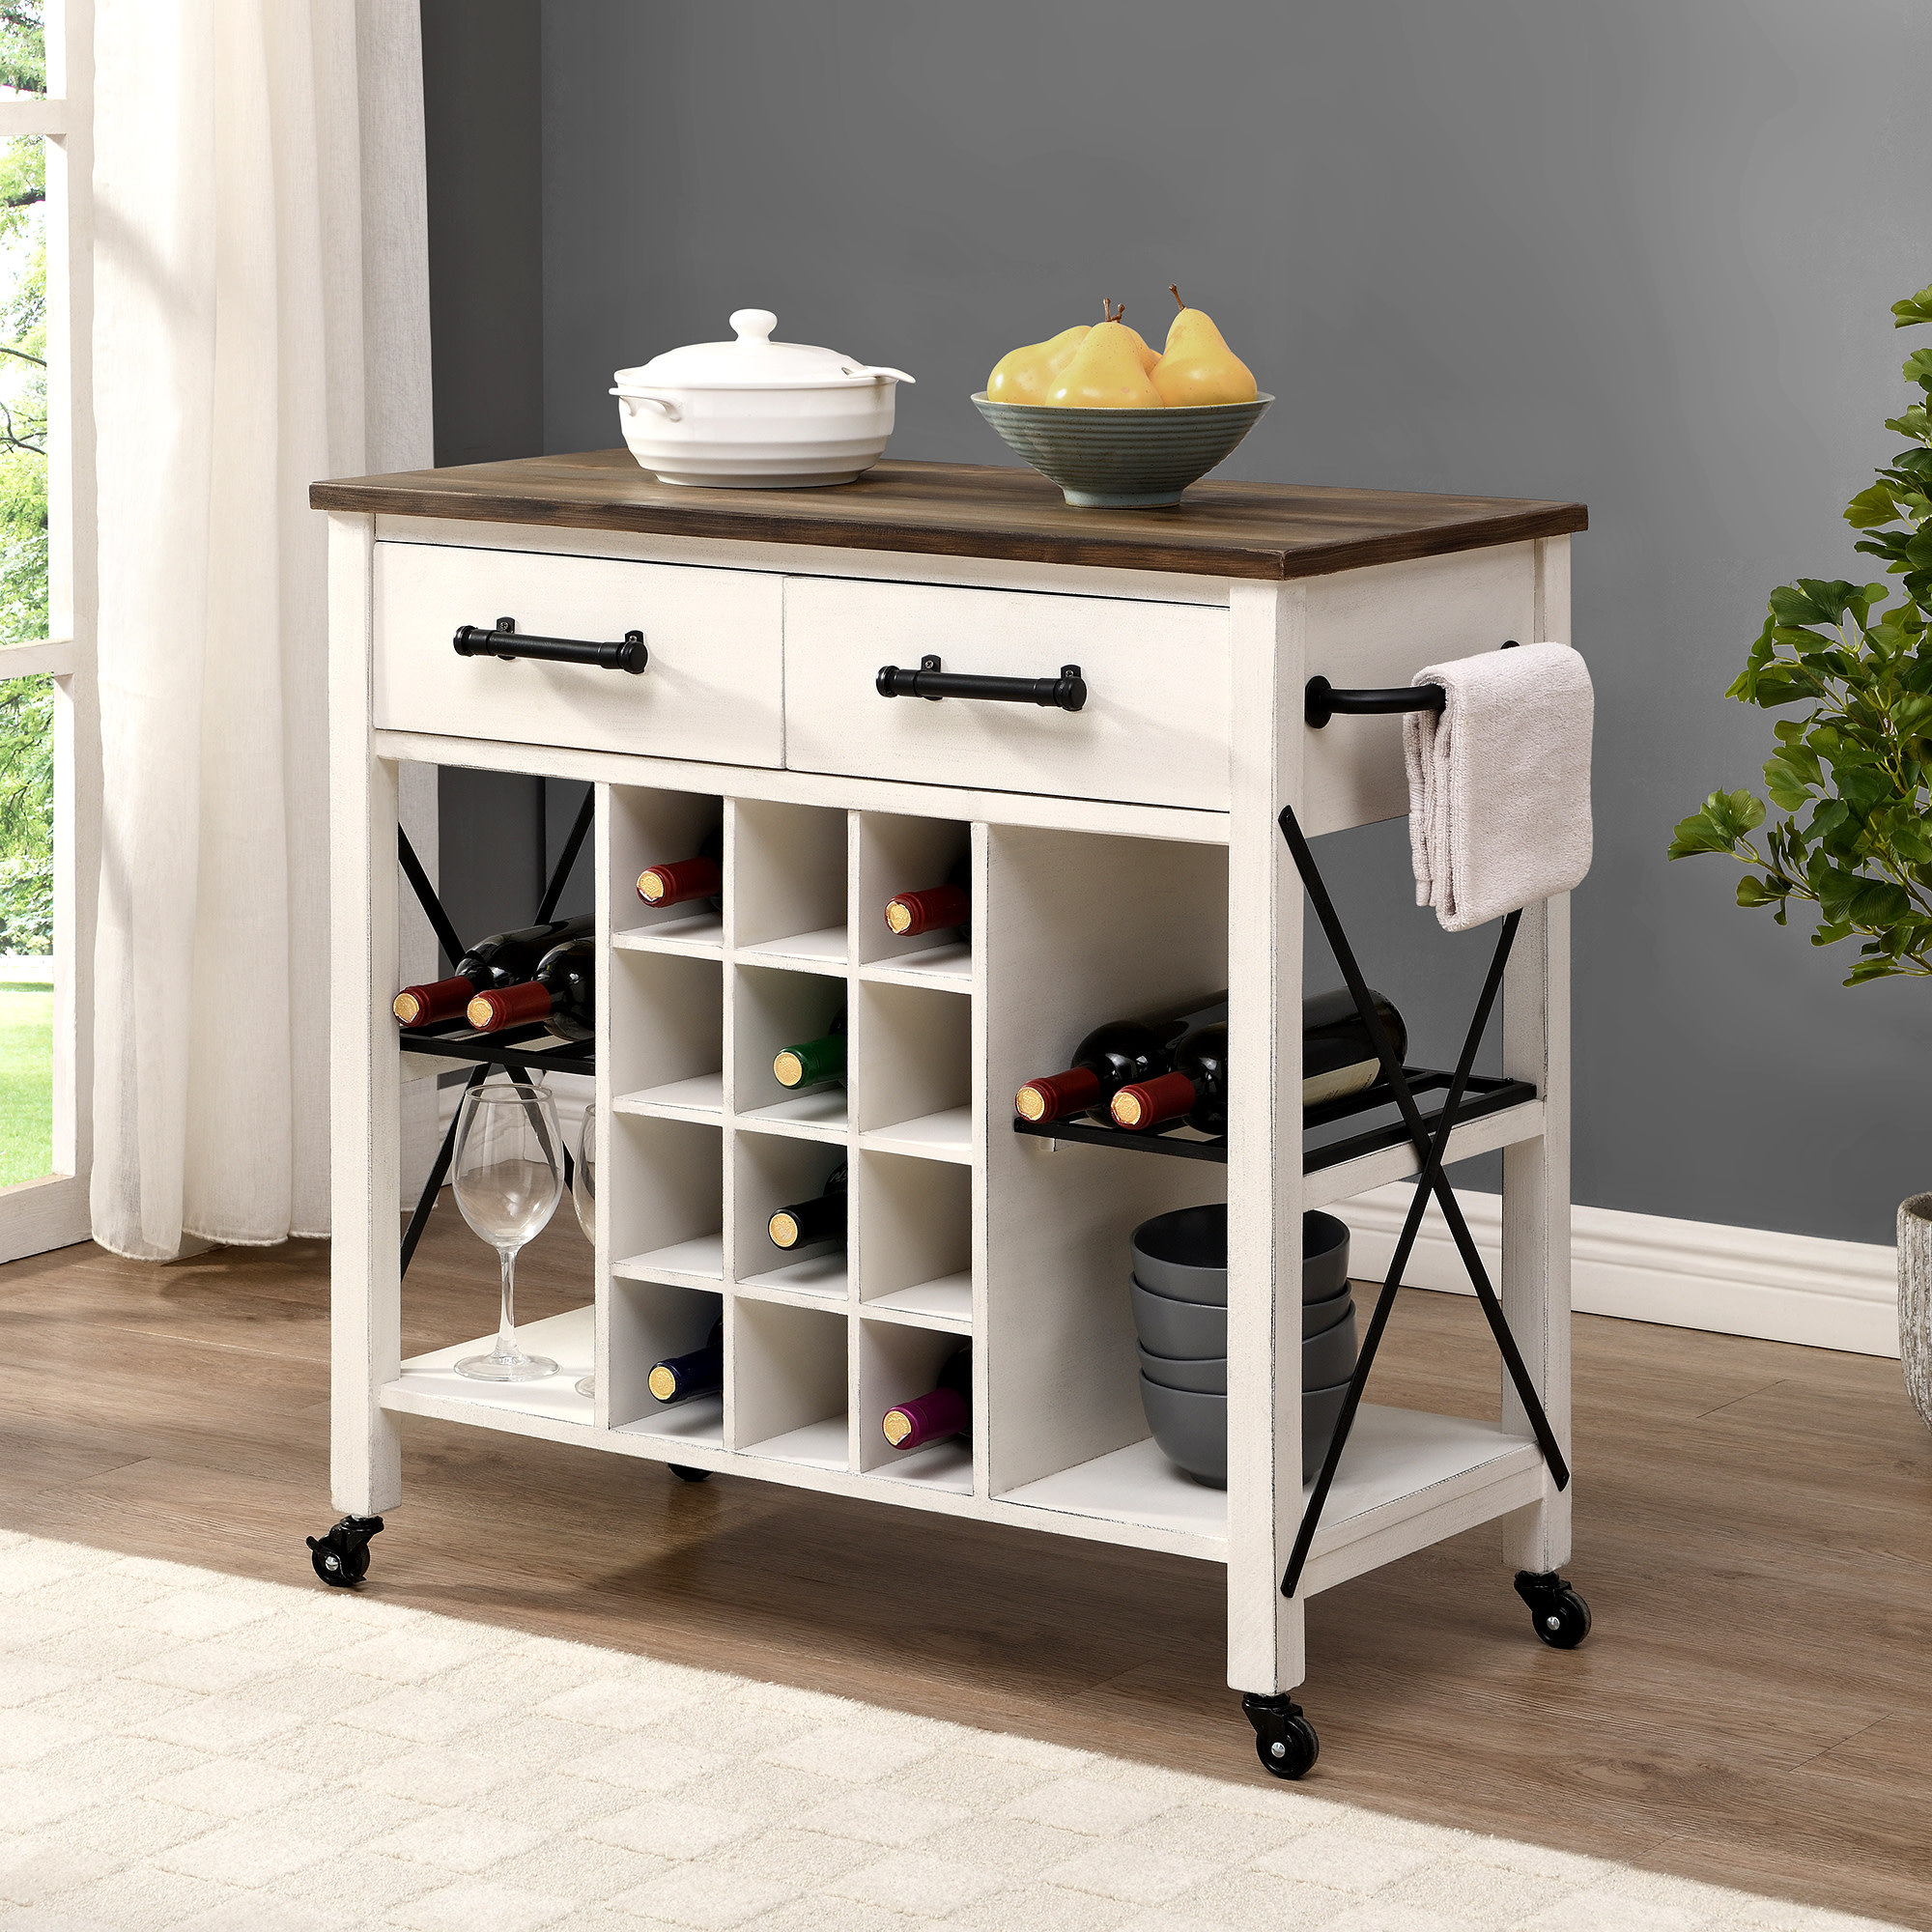 FirsTime & Co. White And Brown Caledonia Kitchen Cart (Farmhouse Wood) $102 + Free Shipping